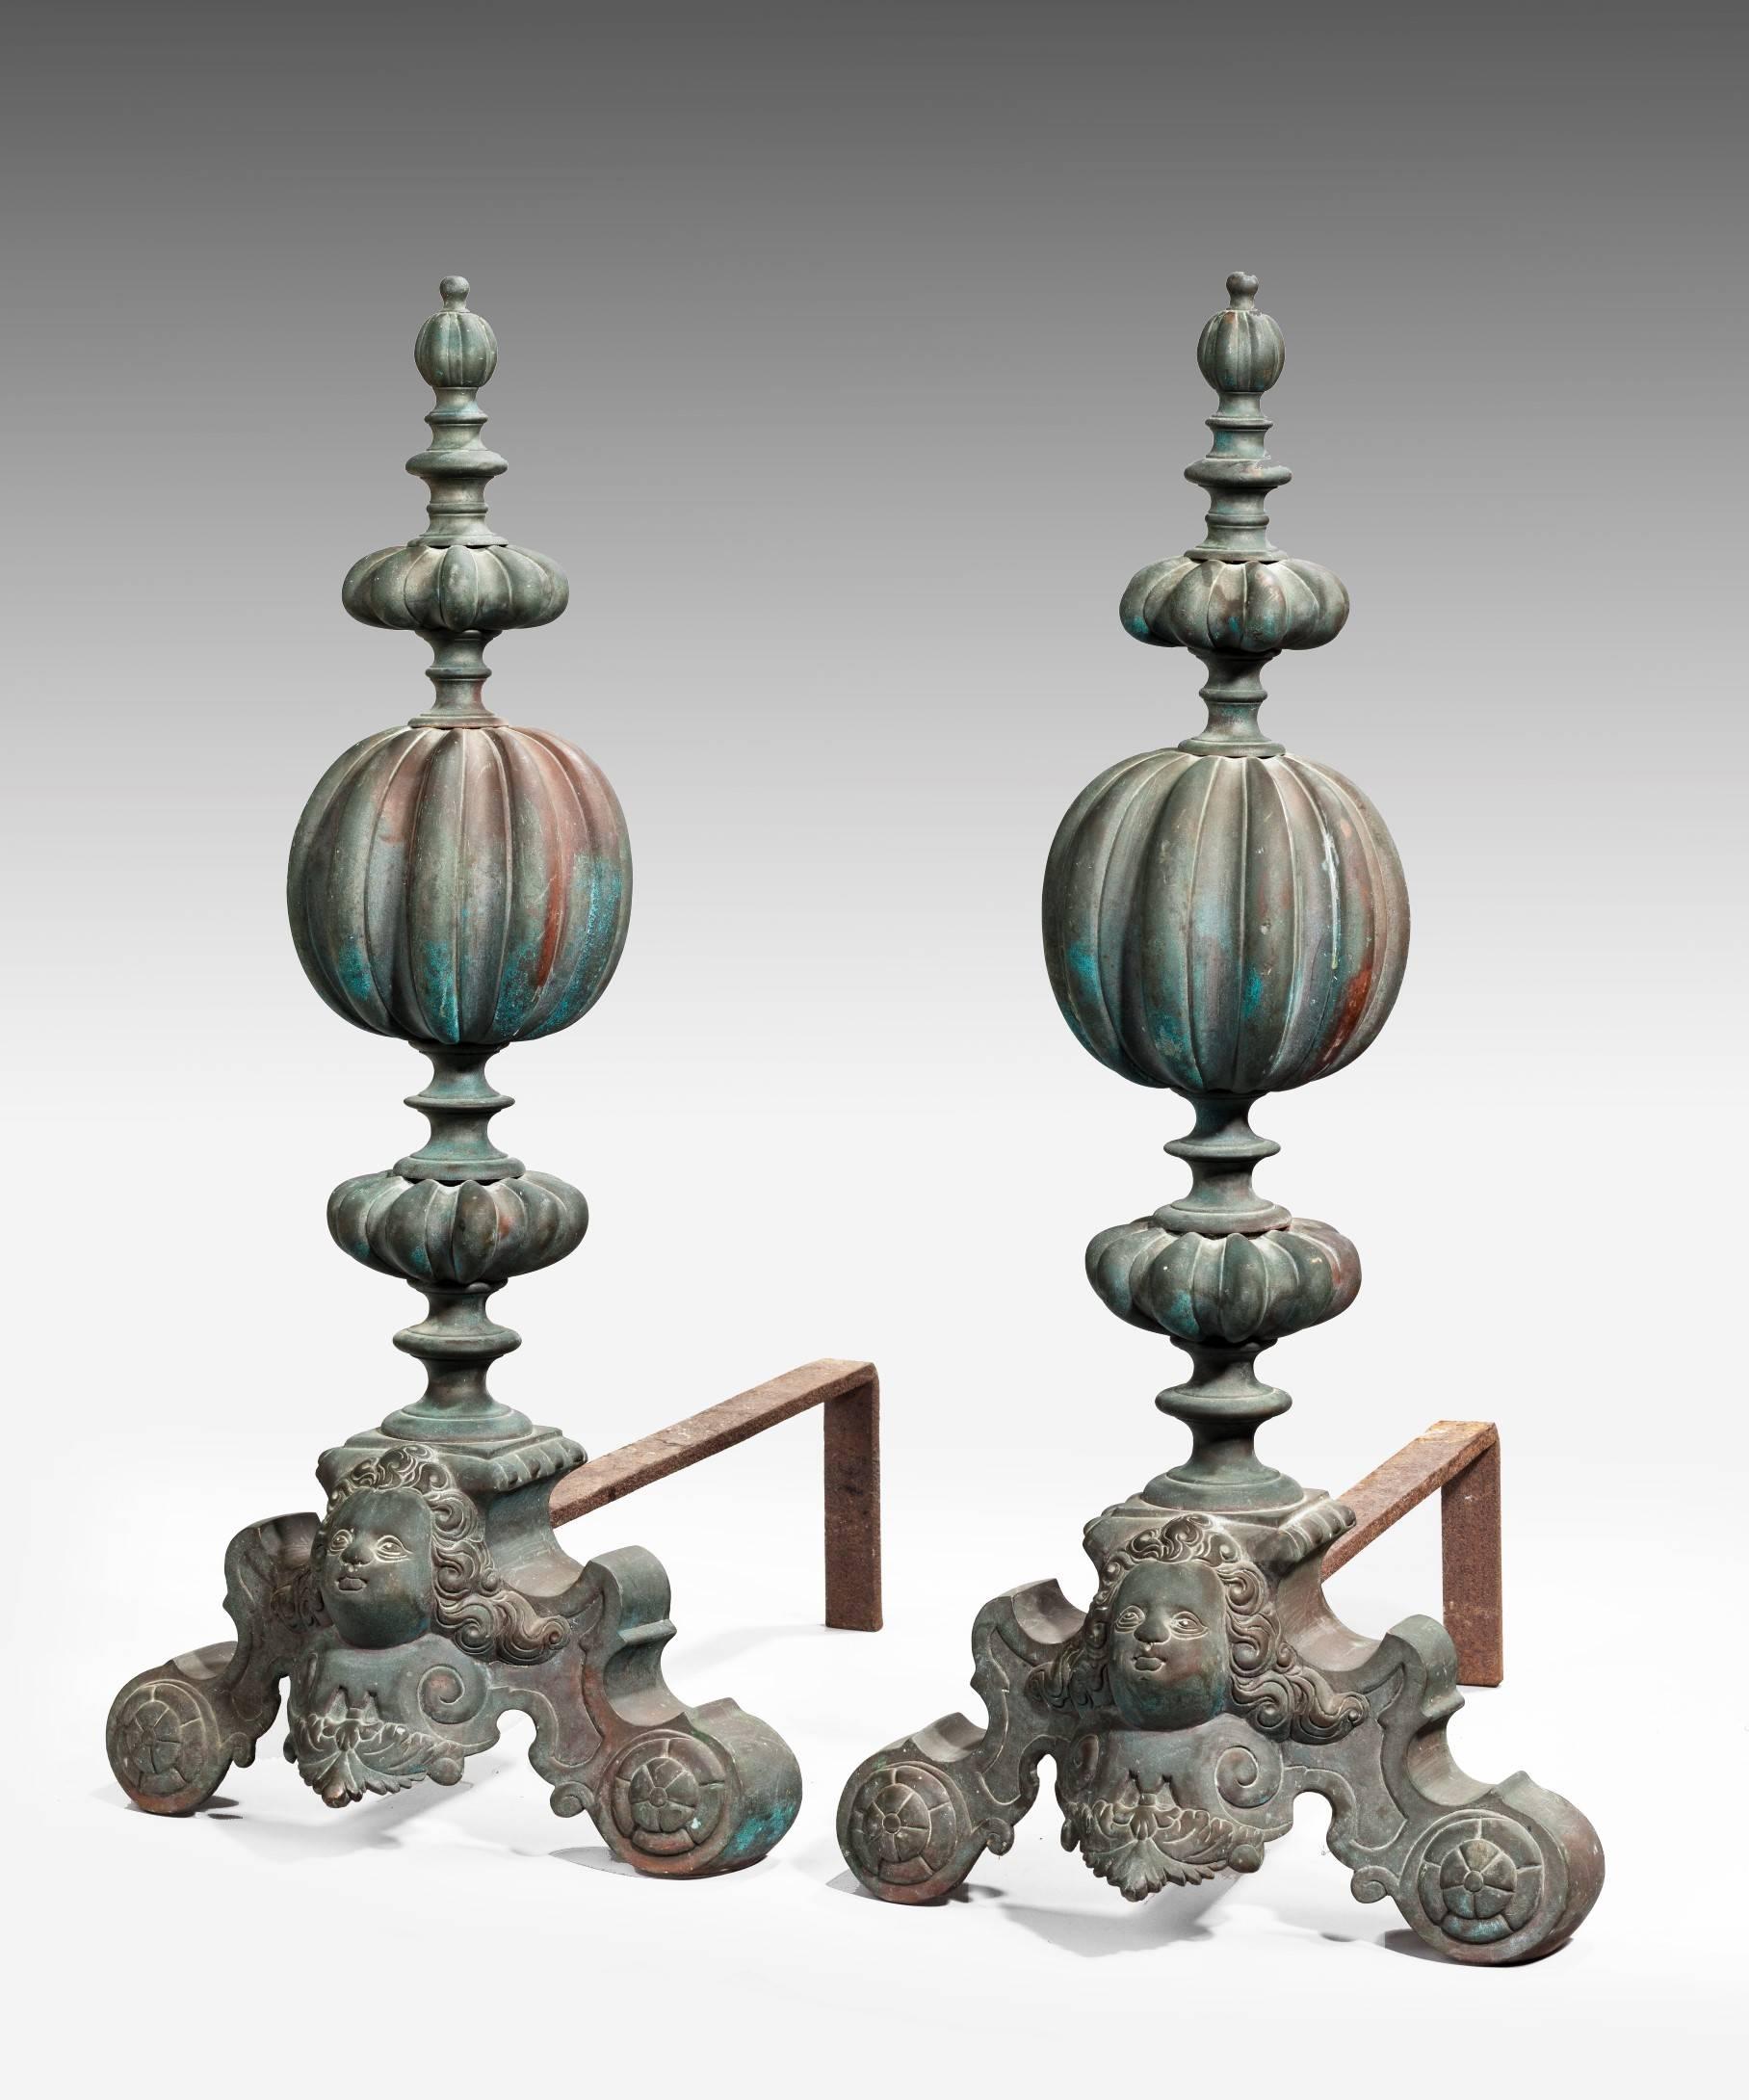 An impressive pair of Baroque style brass fire dogs; with knopped finials and scrolling feet with lovely verdigris patination. Similar fire dogs or andirons can be found in some of England's finest country houses including Knole, Kent.